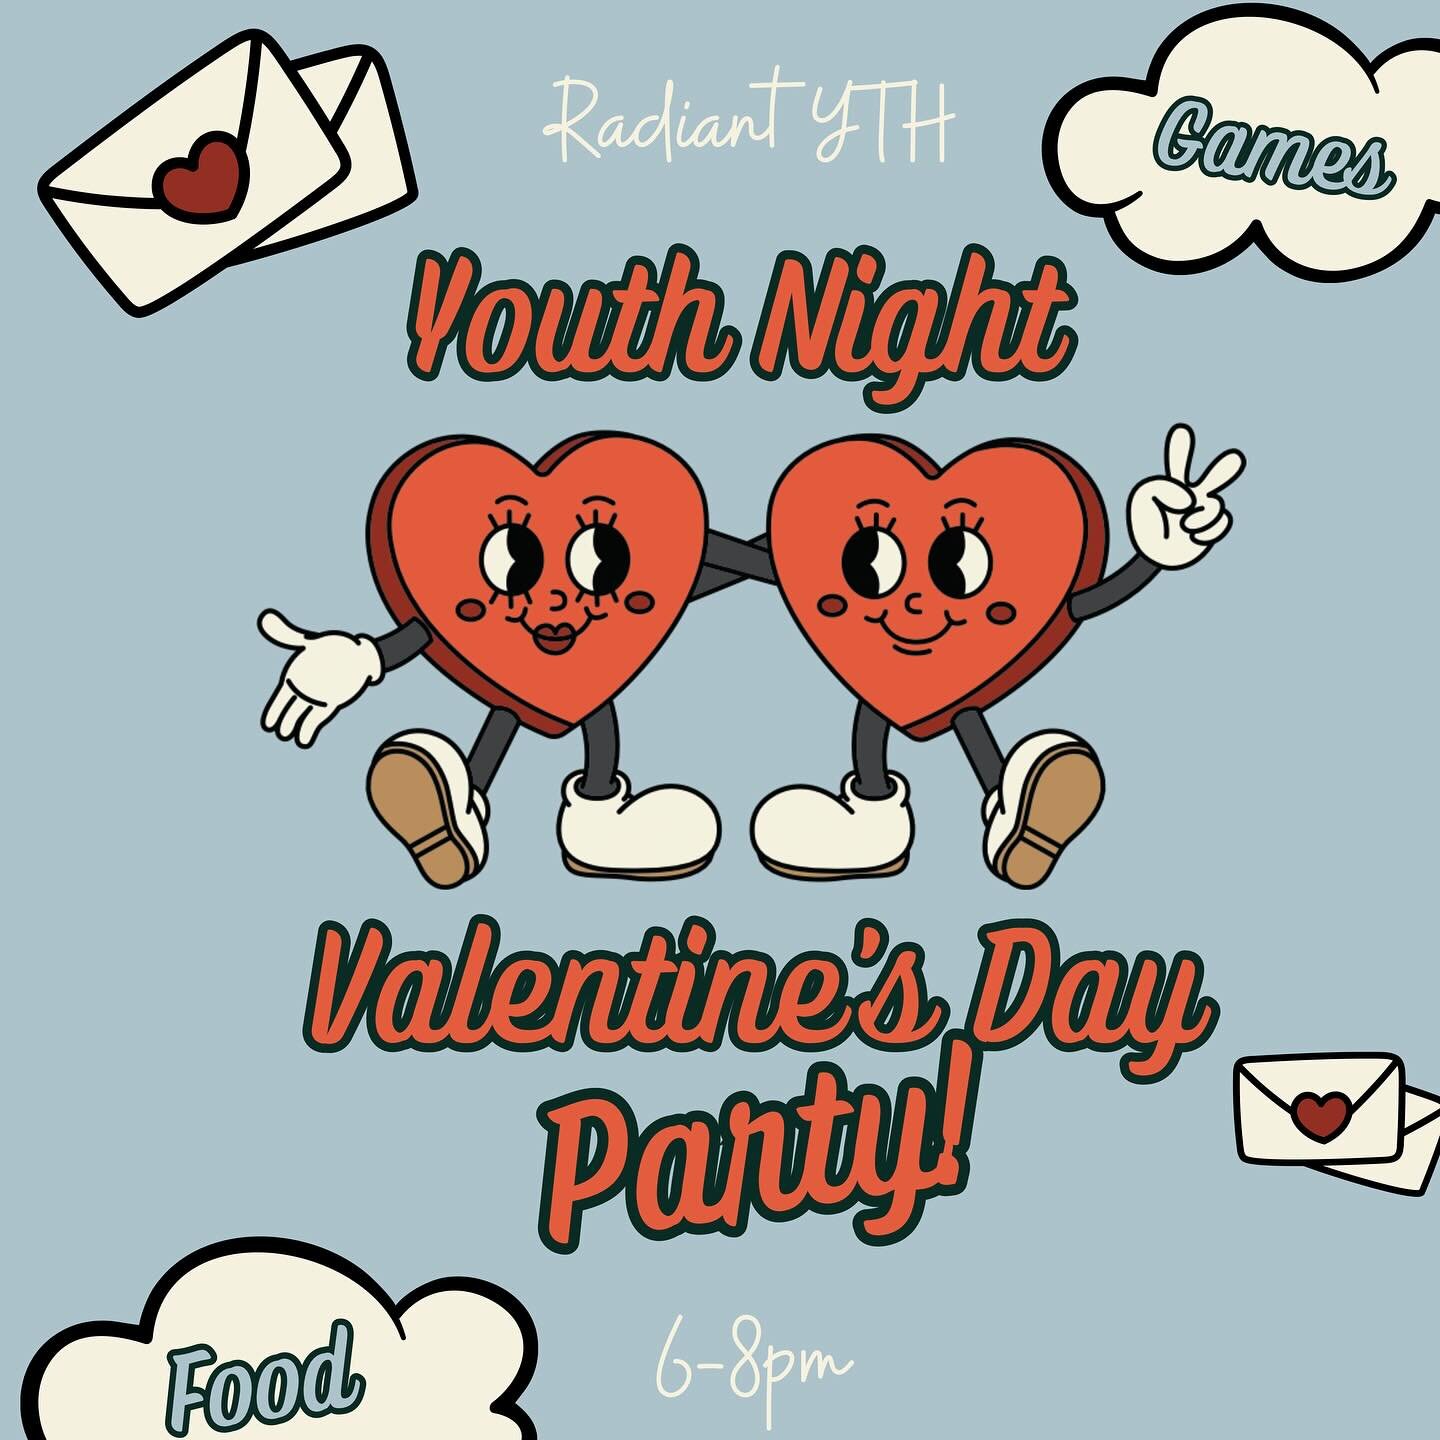 ❤️WHO&rsquo;S READY FOR A PARTY!❤️ This Wednesday night we&rsquo;ll have FOOD and lots of FUN GAMES planned out with an awesome message from Pastor Dan. Doors open at 6! We&rsquo;ll see you there!